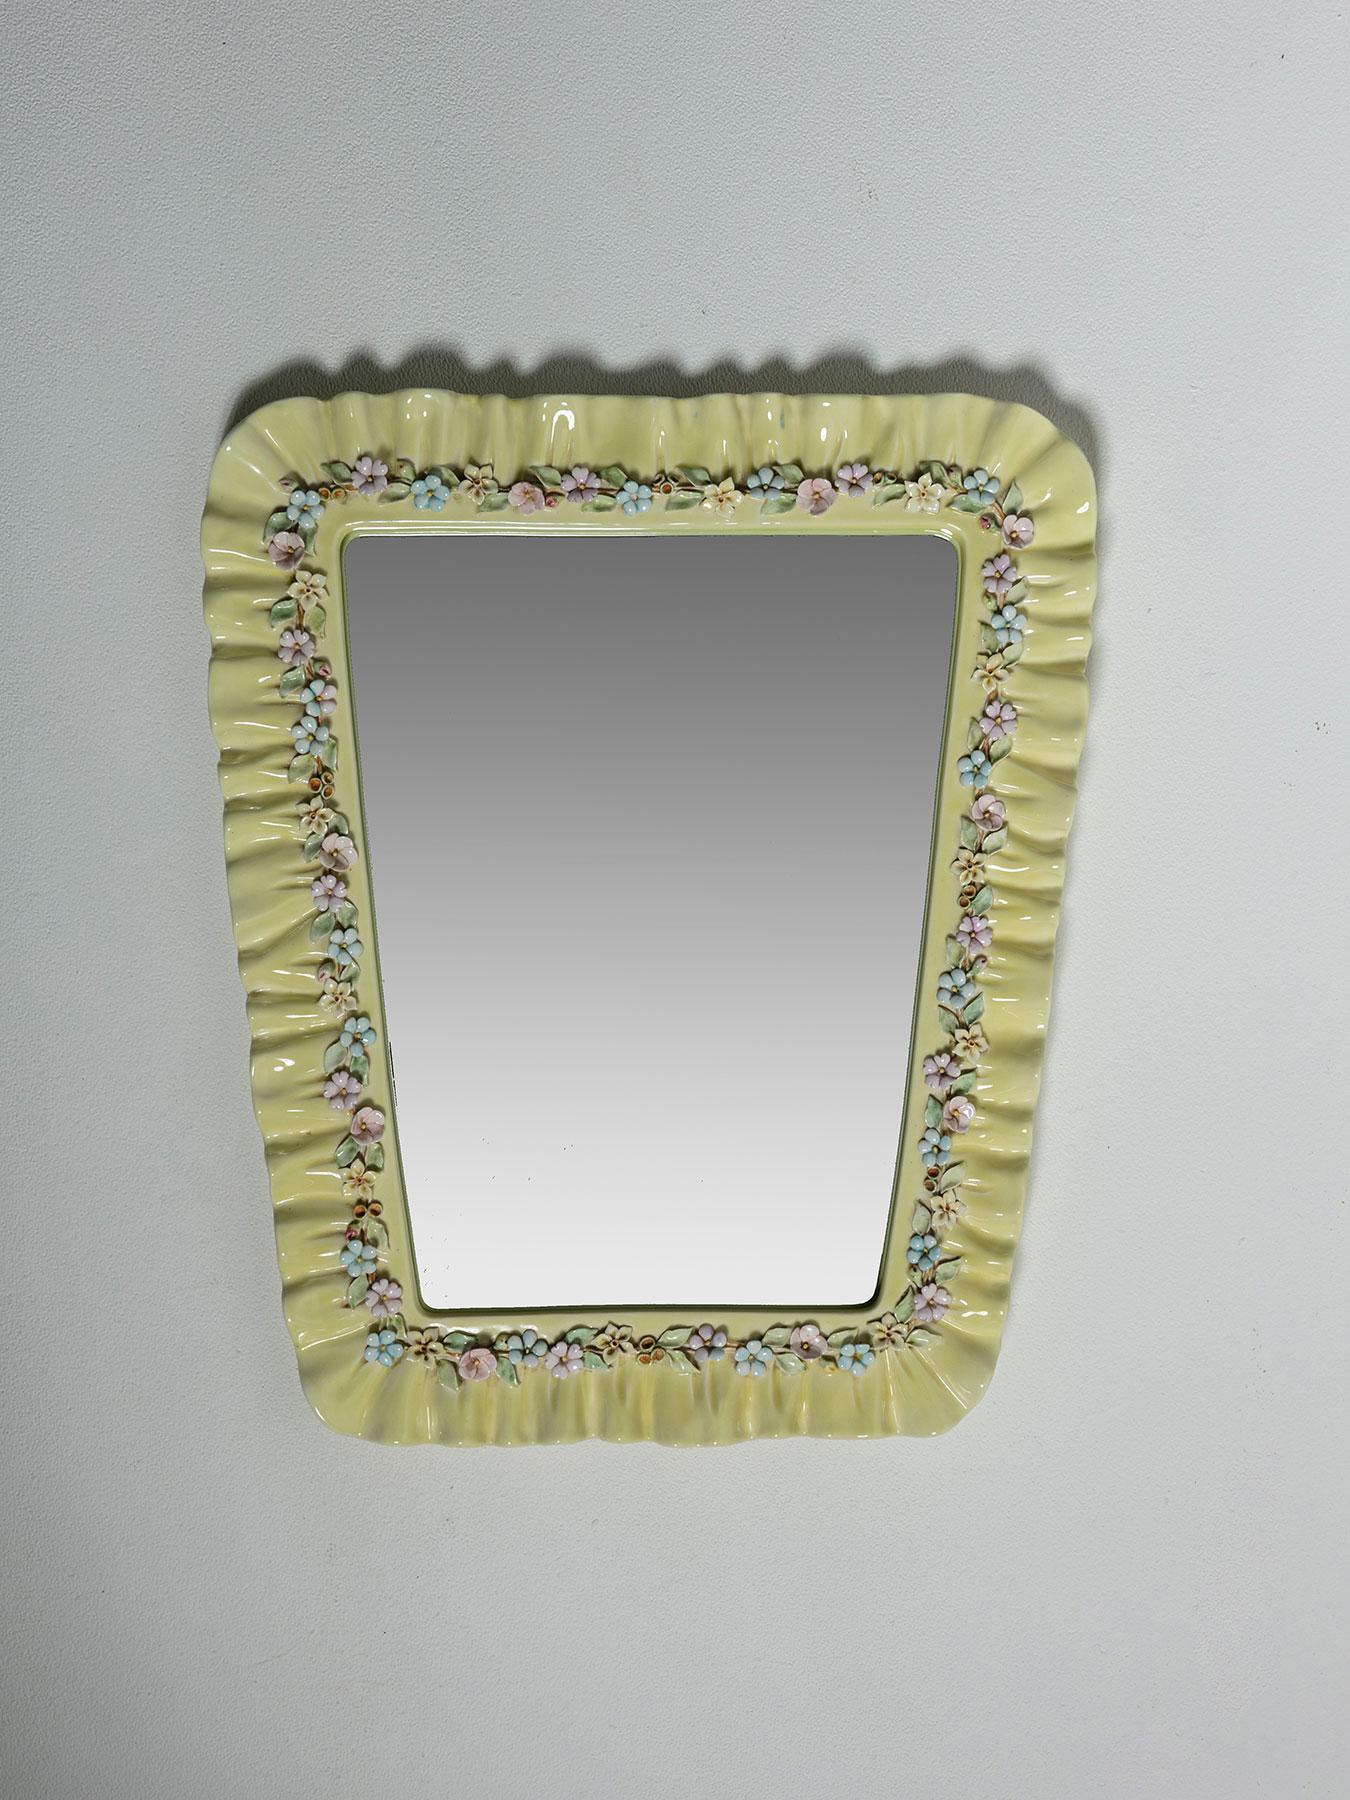 Thin ceramic frame decorated with flowers composes this wall mirror, attributed to Lenci manufacturer.